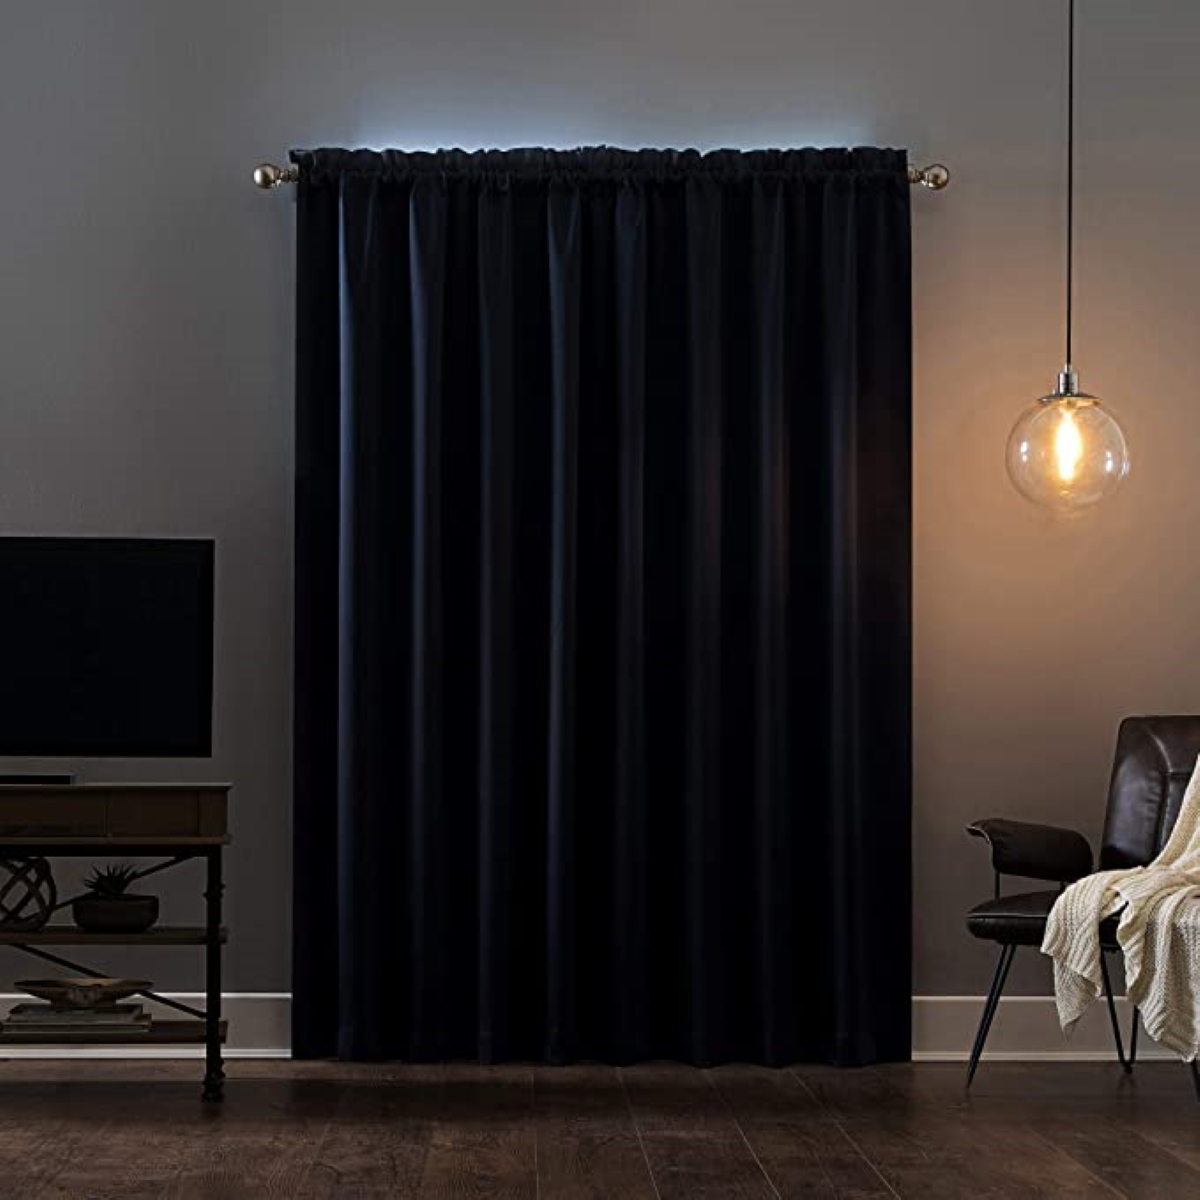 Dark blackout curtains covering window in dim living room